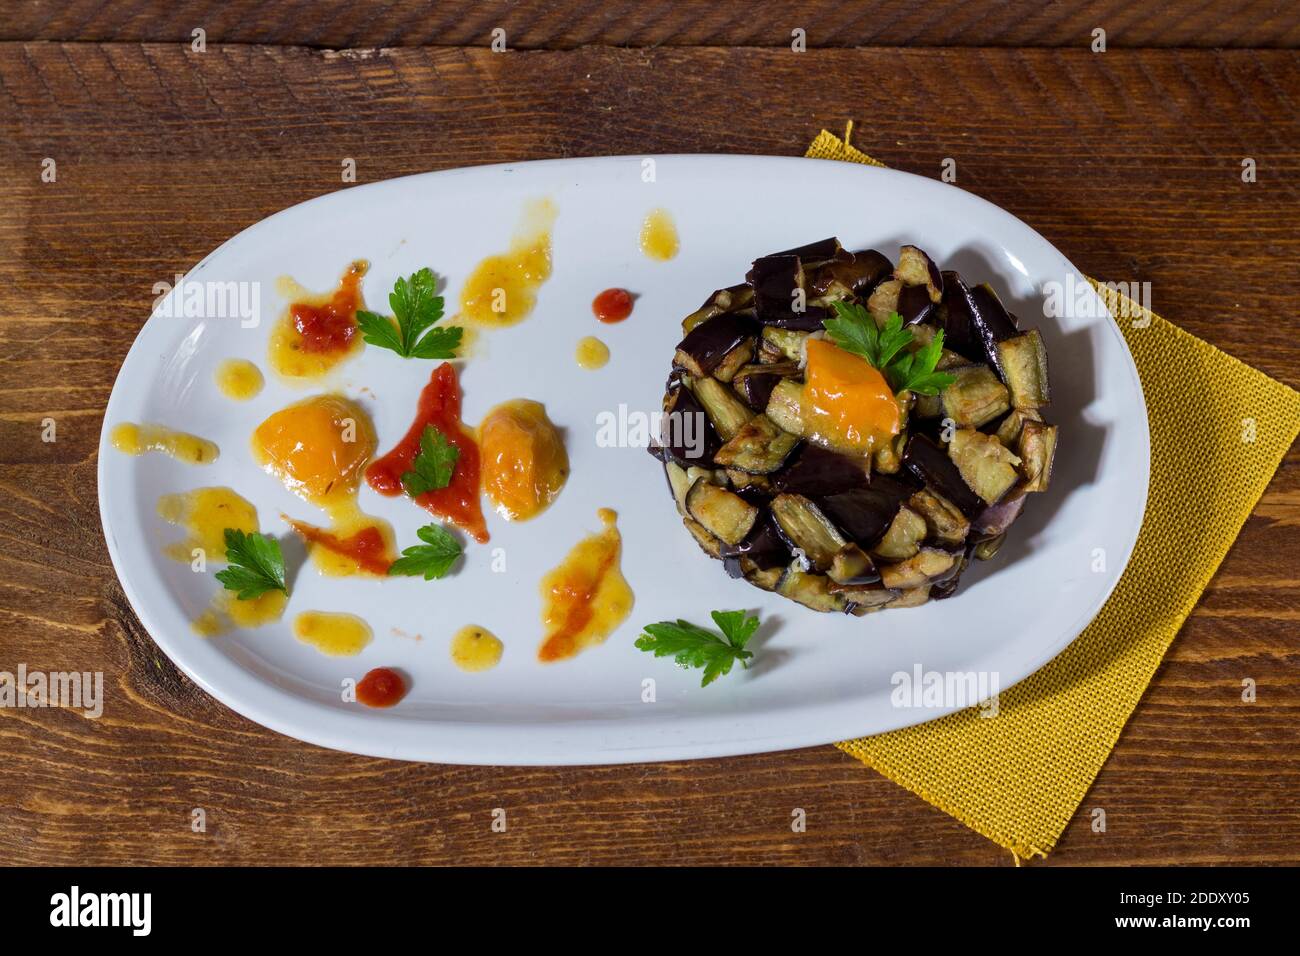 Plate of diced aubergines on a cream of yellow and red cherry tomatoes in a white plate. Wood background. Selective focus. Stock Photo